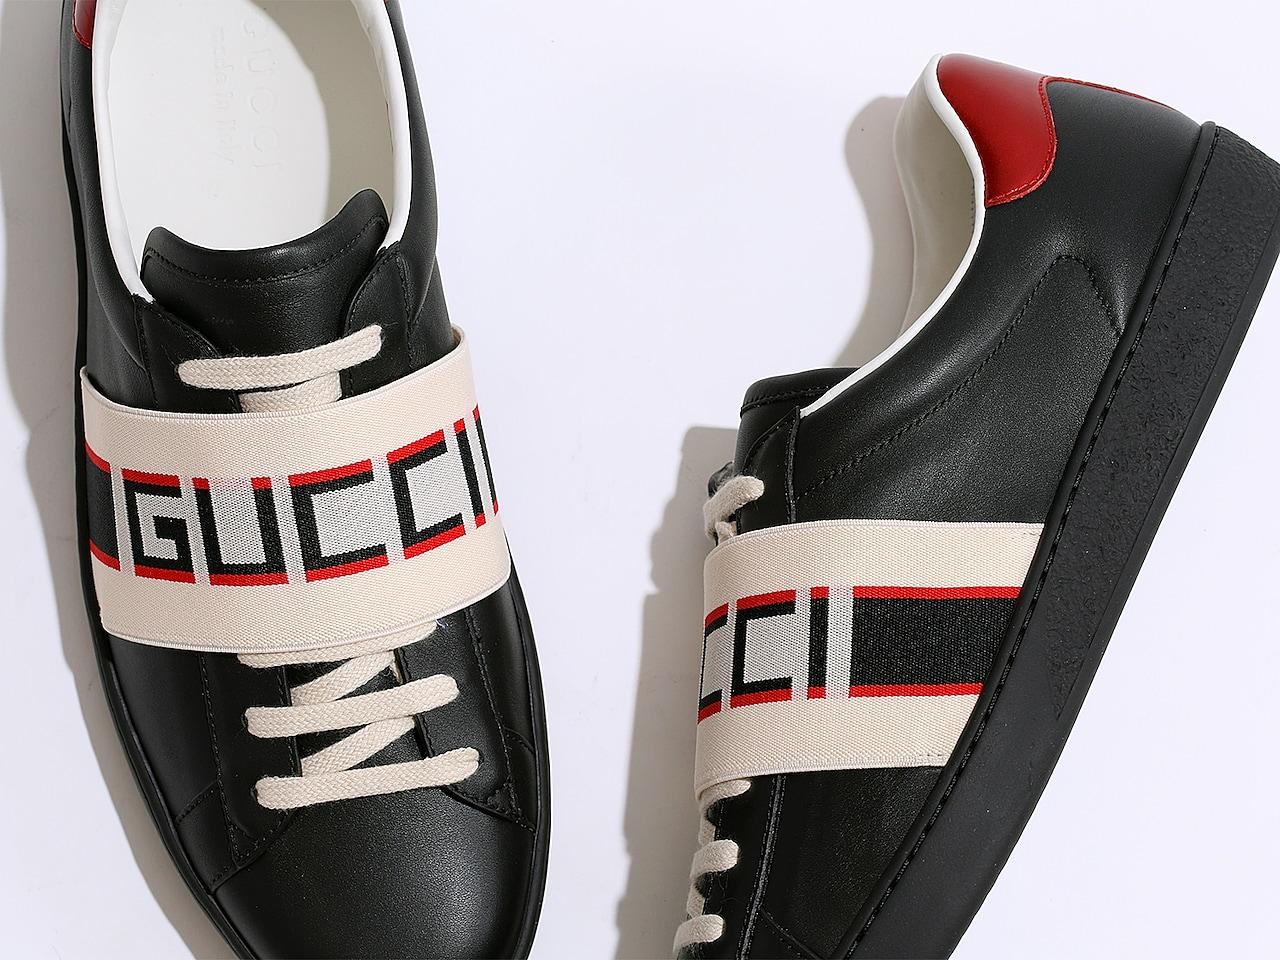 Gucci Rubber New Ace Sneaker in Black/Cream/Red (Black) for Men - Lyst